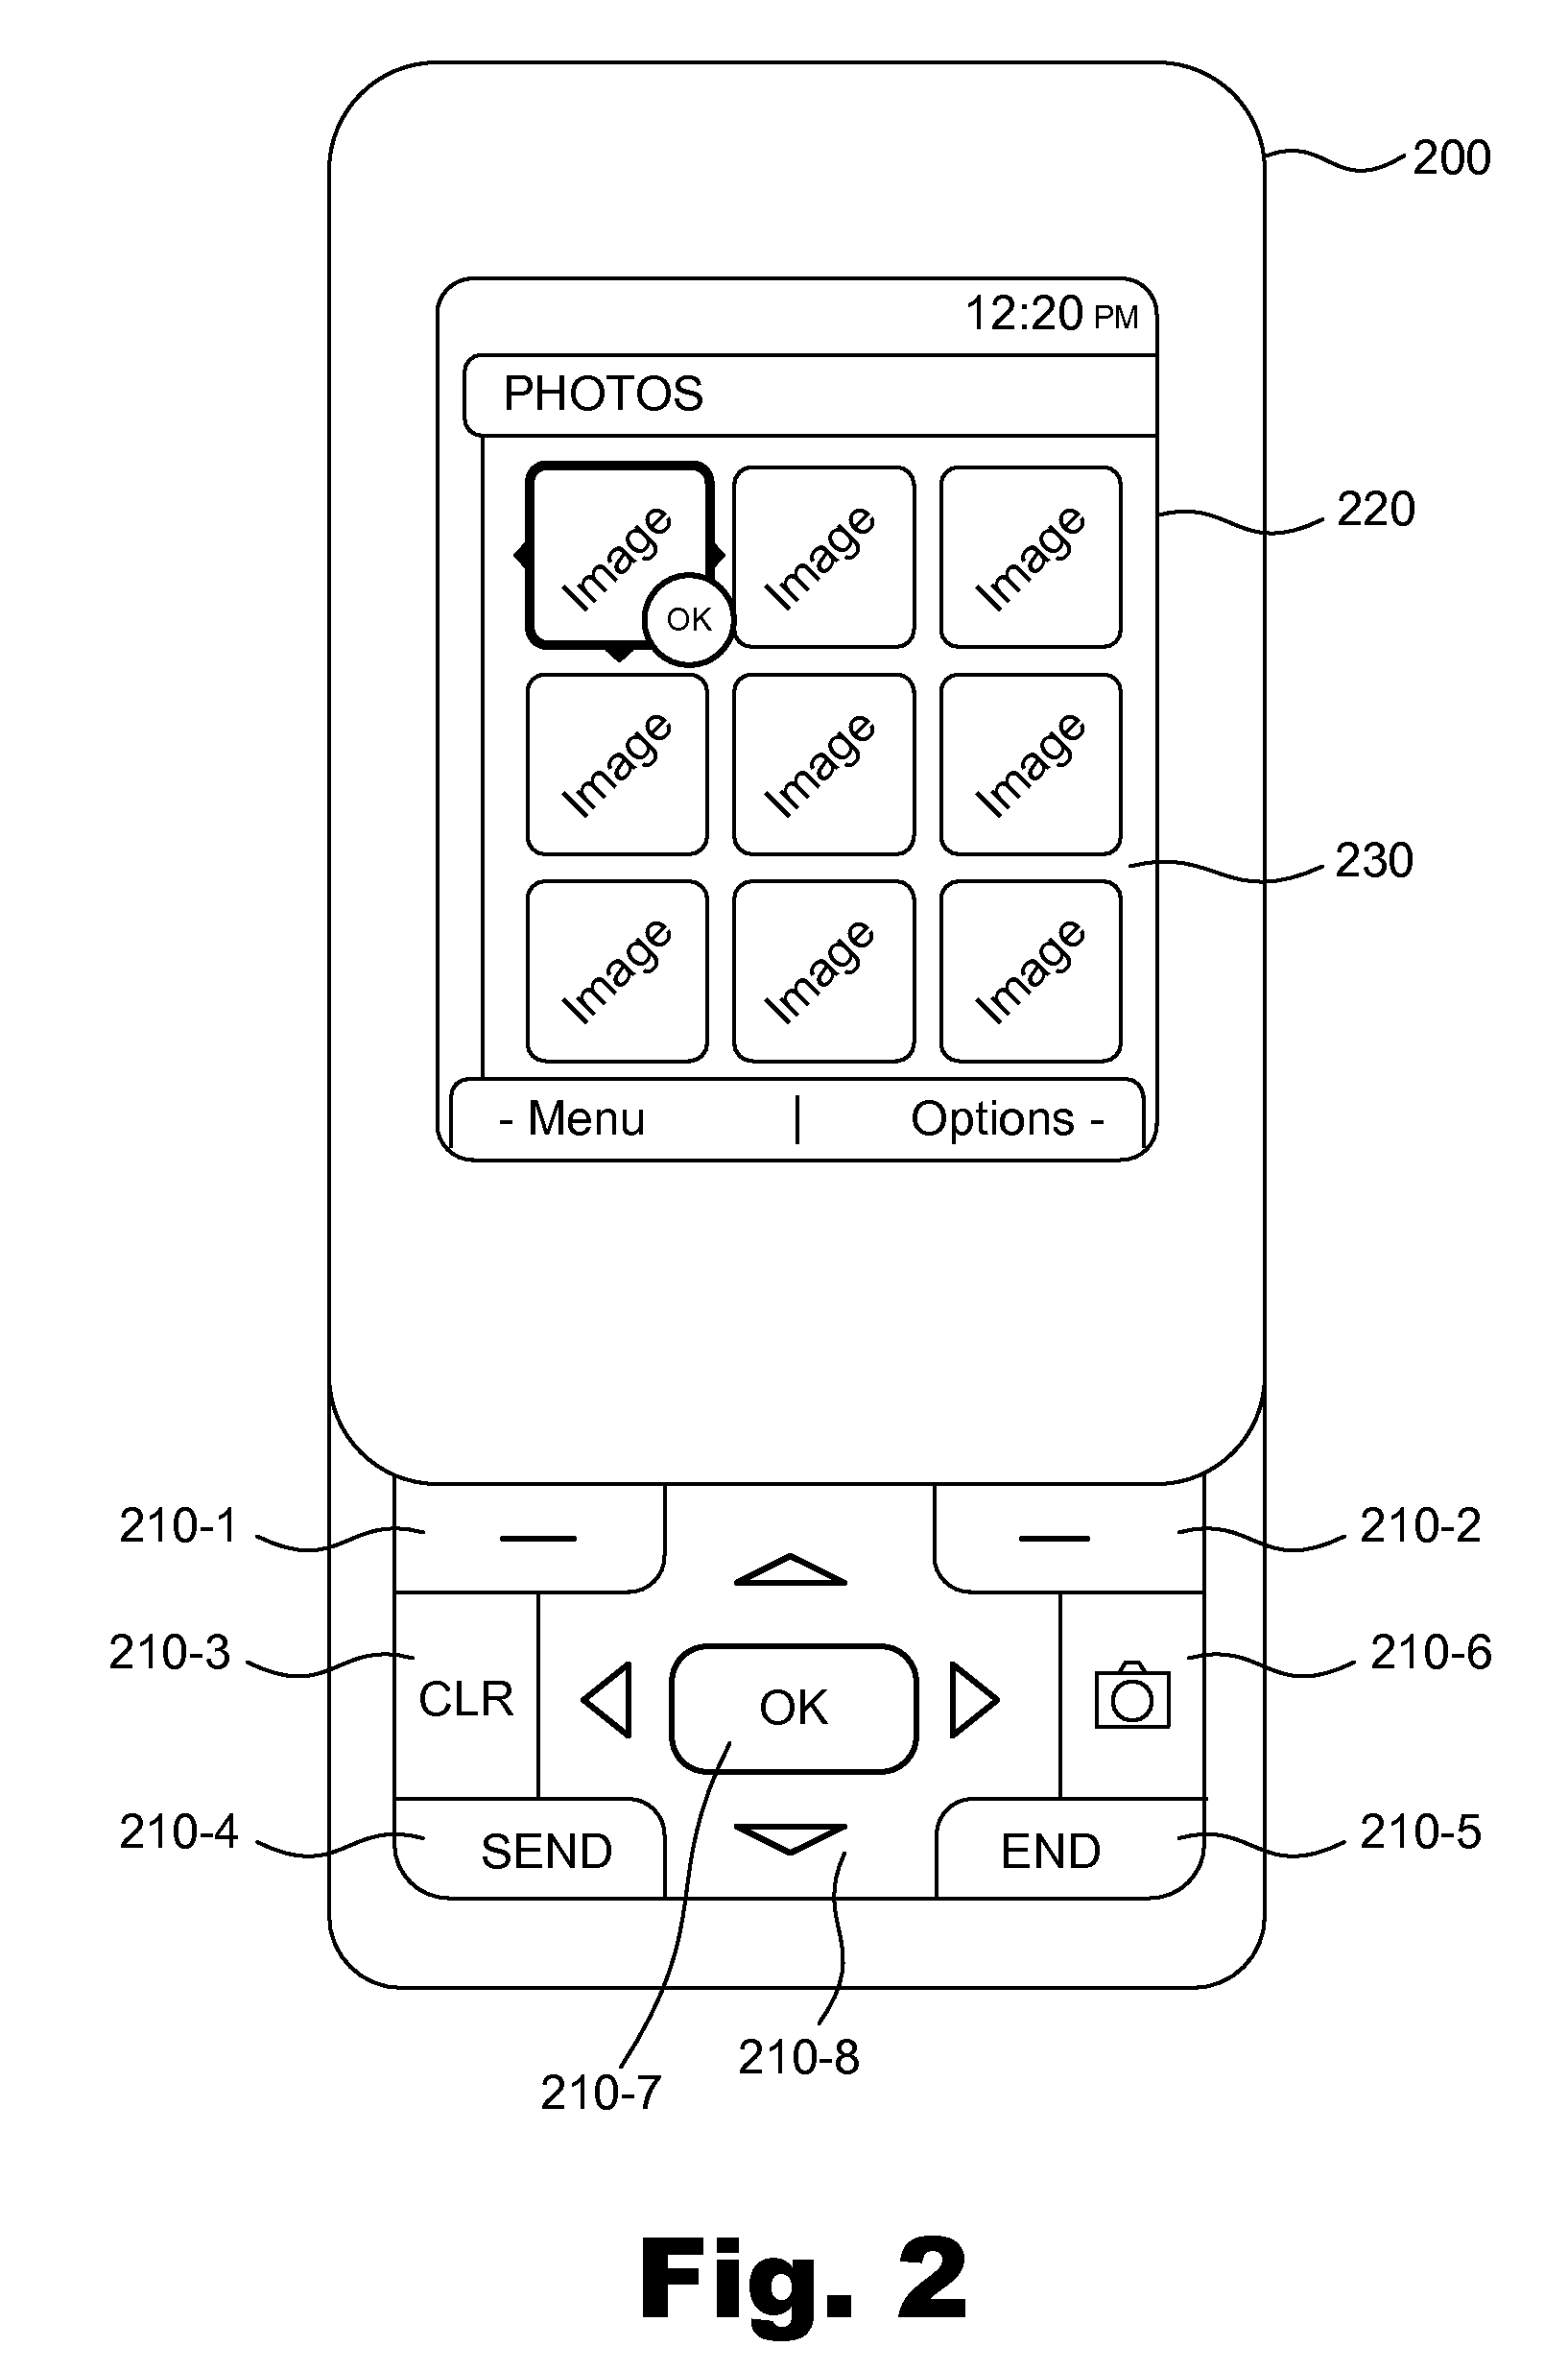 Camera data management and user interface apparatuses, systems, and methods